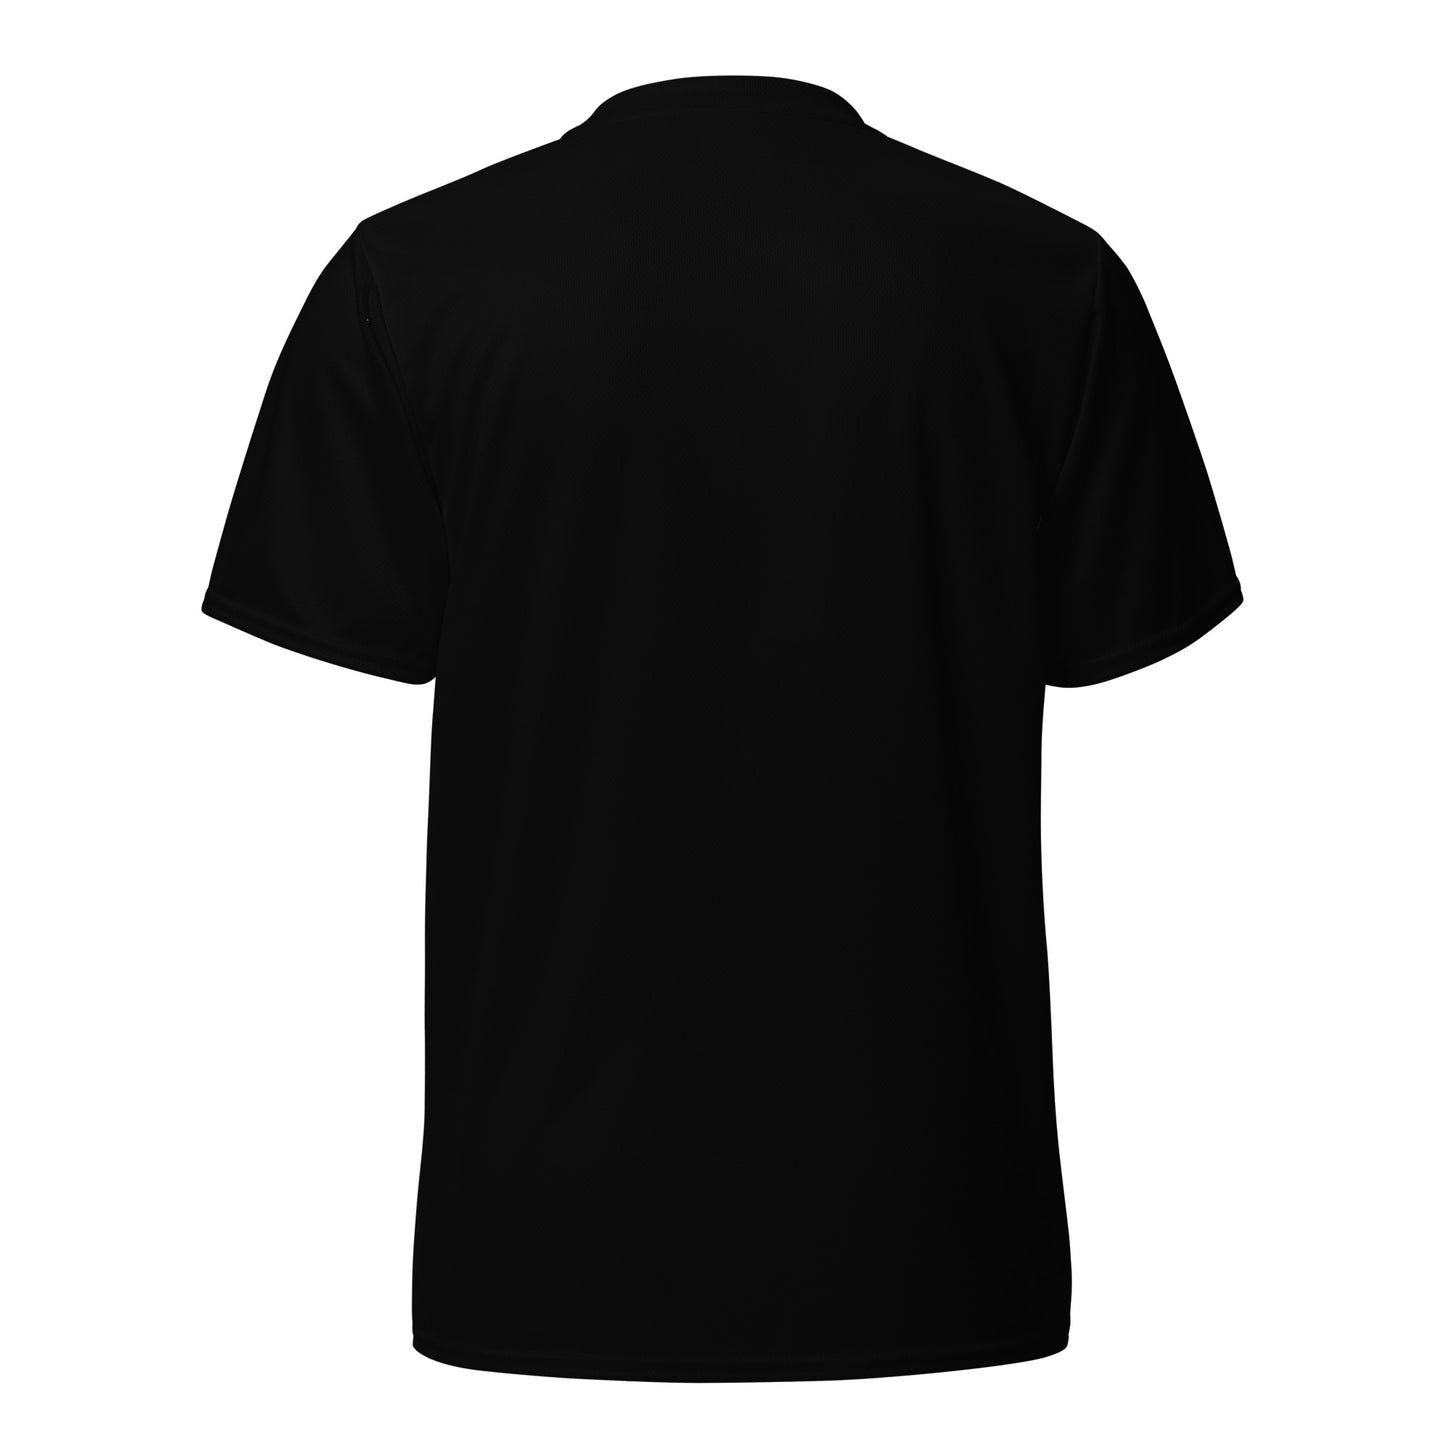 SouthPaw Bowling Jersey - Solid Black